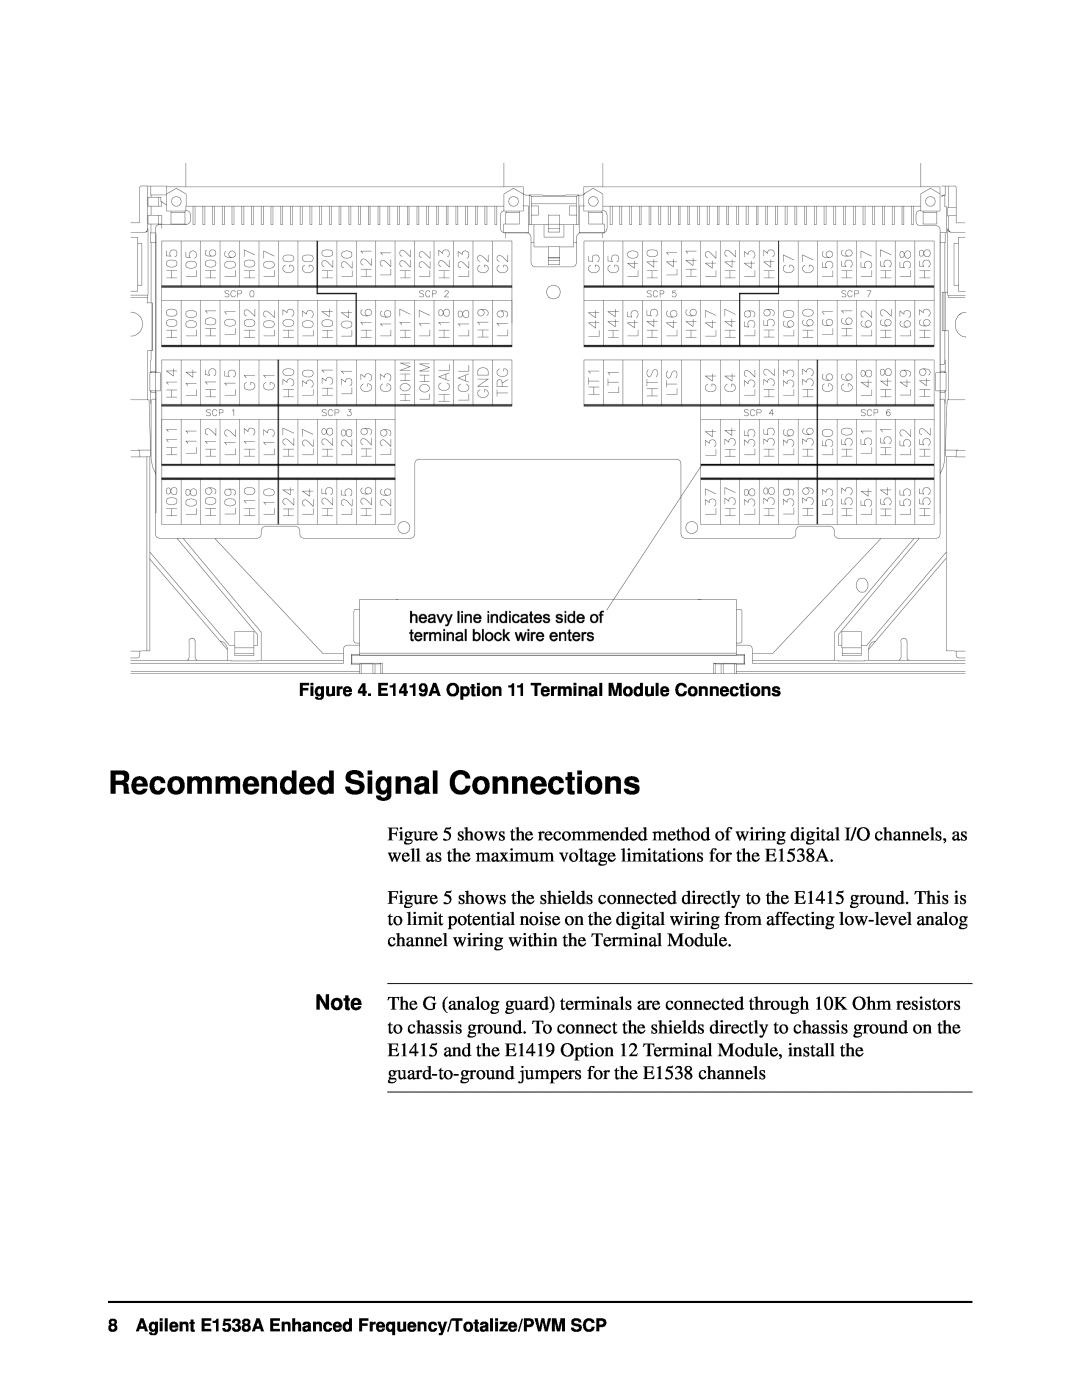 VXI VT1538A user manual Recommended Signal Connections, E1419A Option 11 Terminal Module Connections 